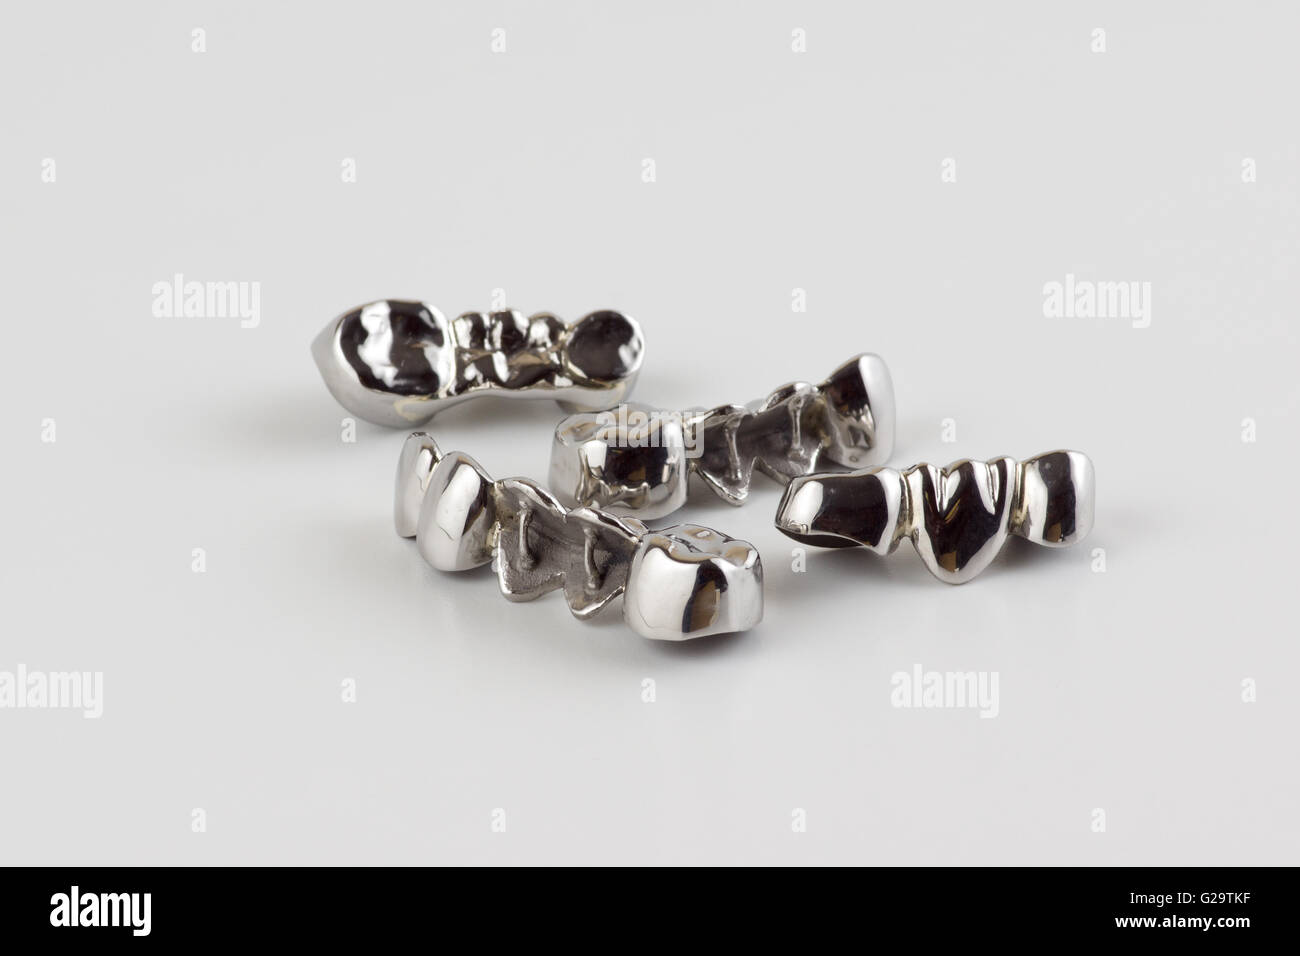 steel dentures made in dental laboratory on a white background Stock Photo